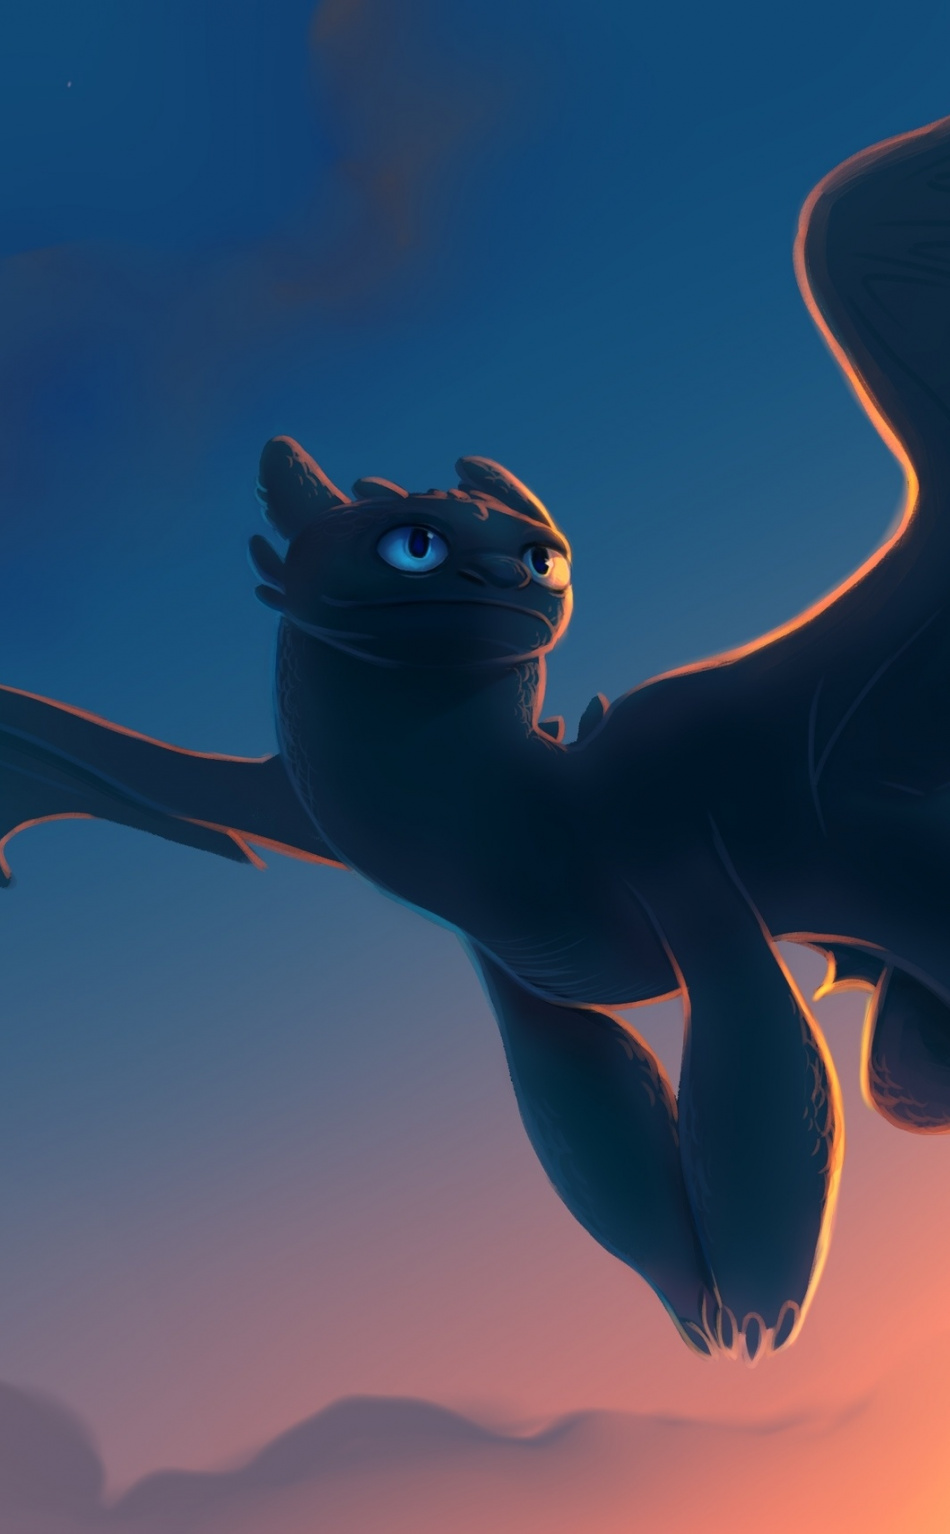 toothless iphone wallpaper,blue,sky,organism,fictional character,electric blue